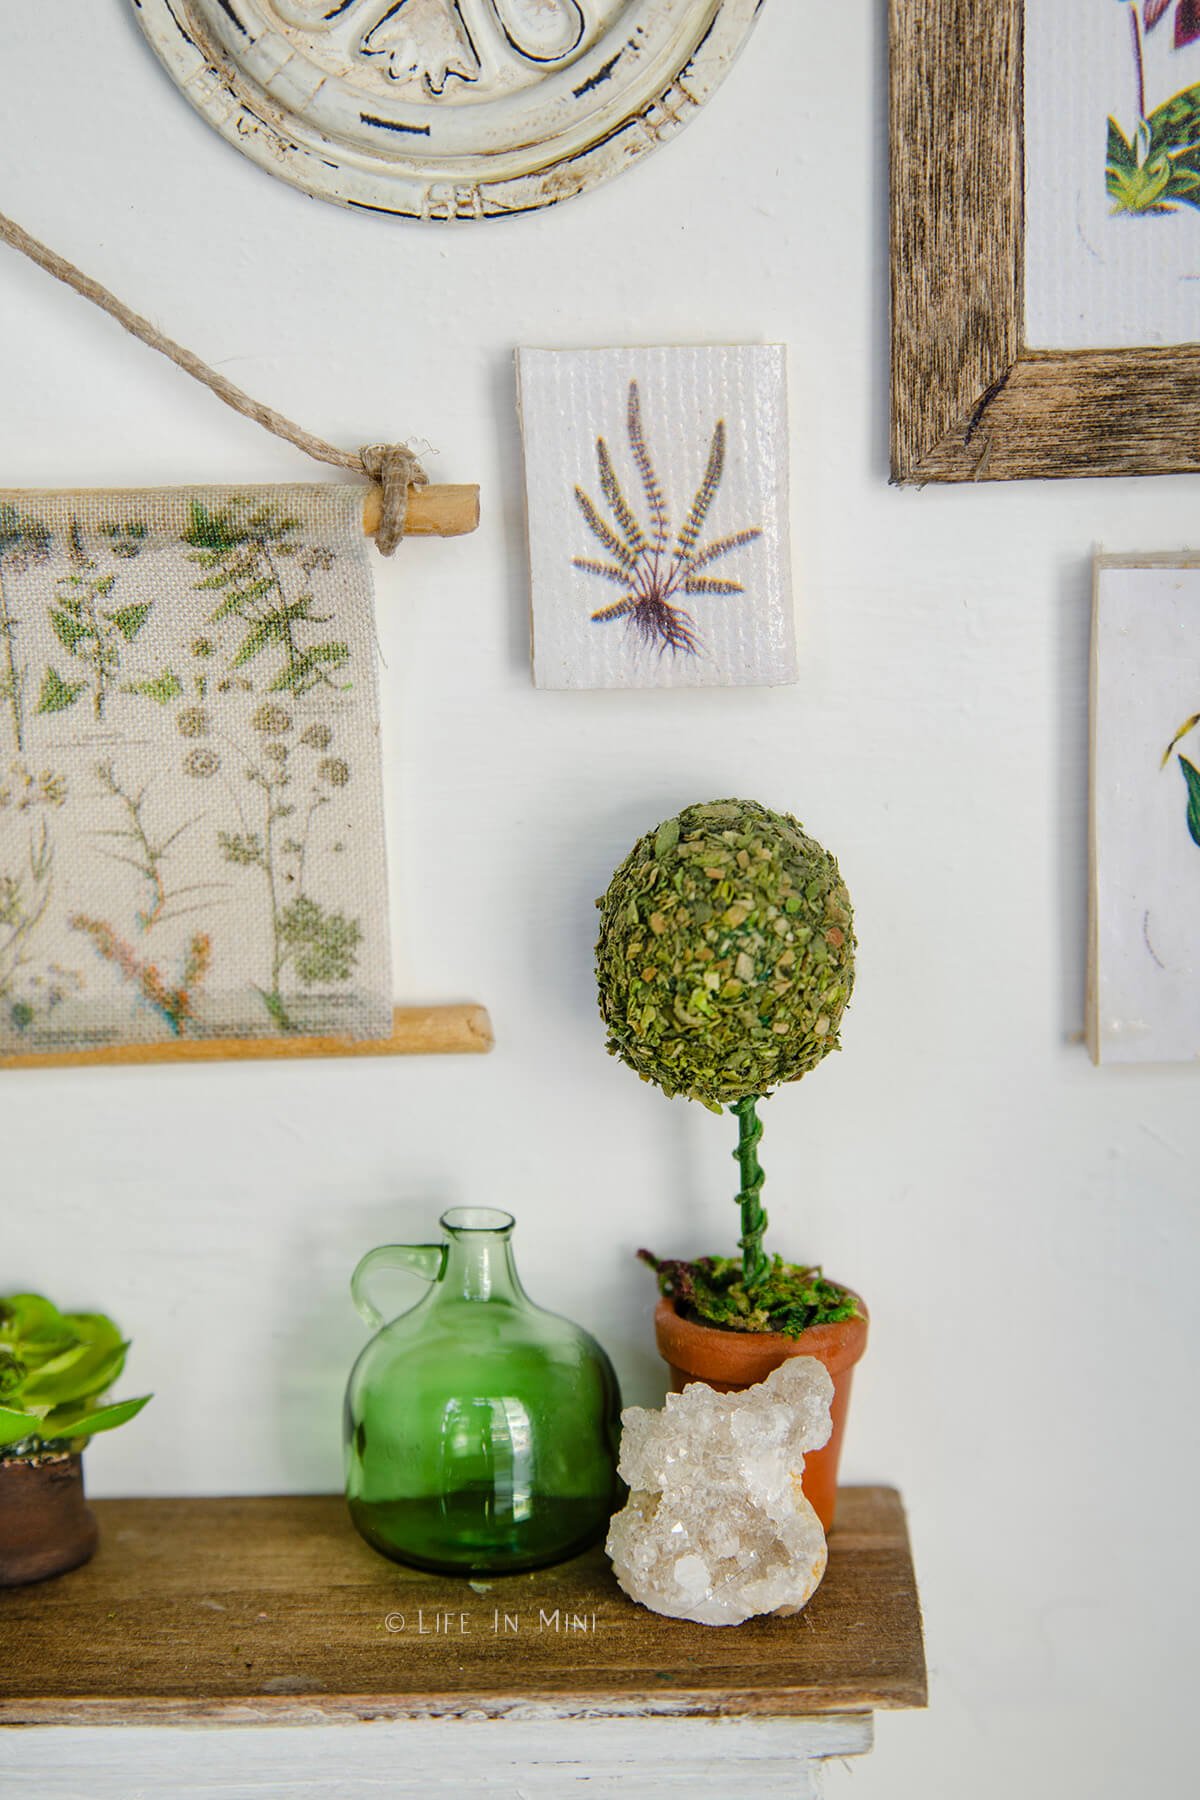 Closeup of a miniature scene with a small topiary, crystal and green bottle with various botanical prints on the wall